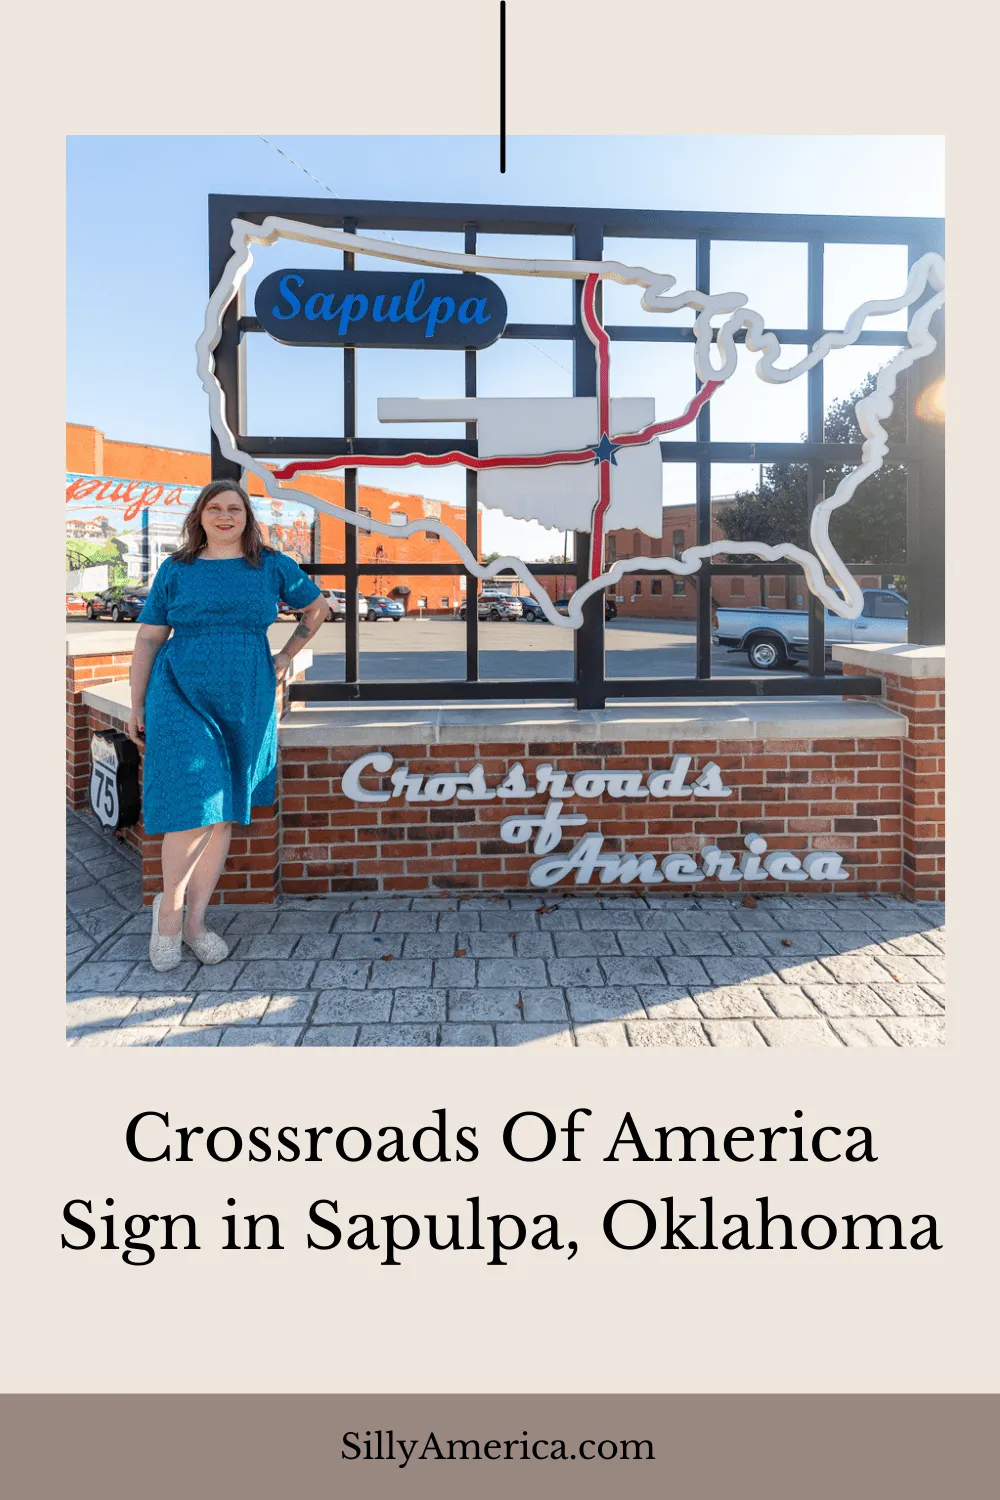 Go down to the crossroads and find this Route 66 roadside attraction: the Crossroads Of America sign in Sapulpa, Oklahoma.  #RoadTrips #RoadTripStop #Route66 #Route66RoadTrip #OklahomaRoute66 #Oklahoma #OklahomaRoadTrip #OklahomaRoadsideAttractions #RoadsideAttractions #RoadsideAttraction #RoadsideAmerica #RoadTrip